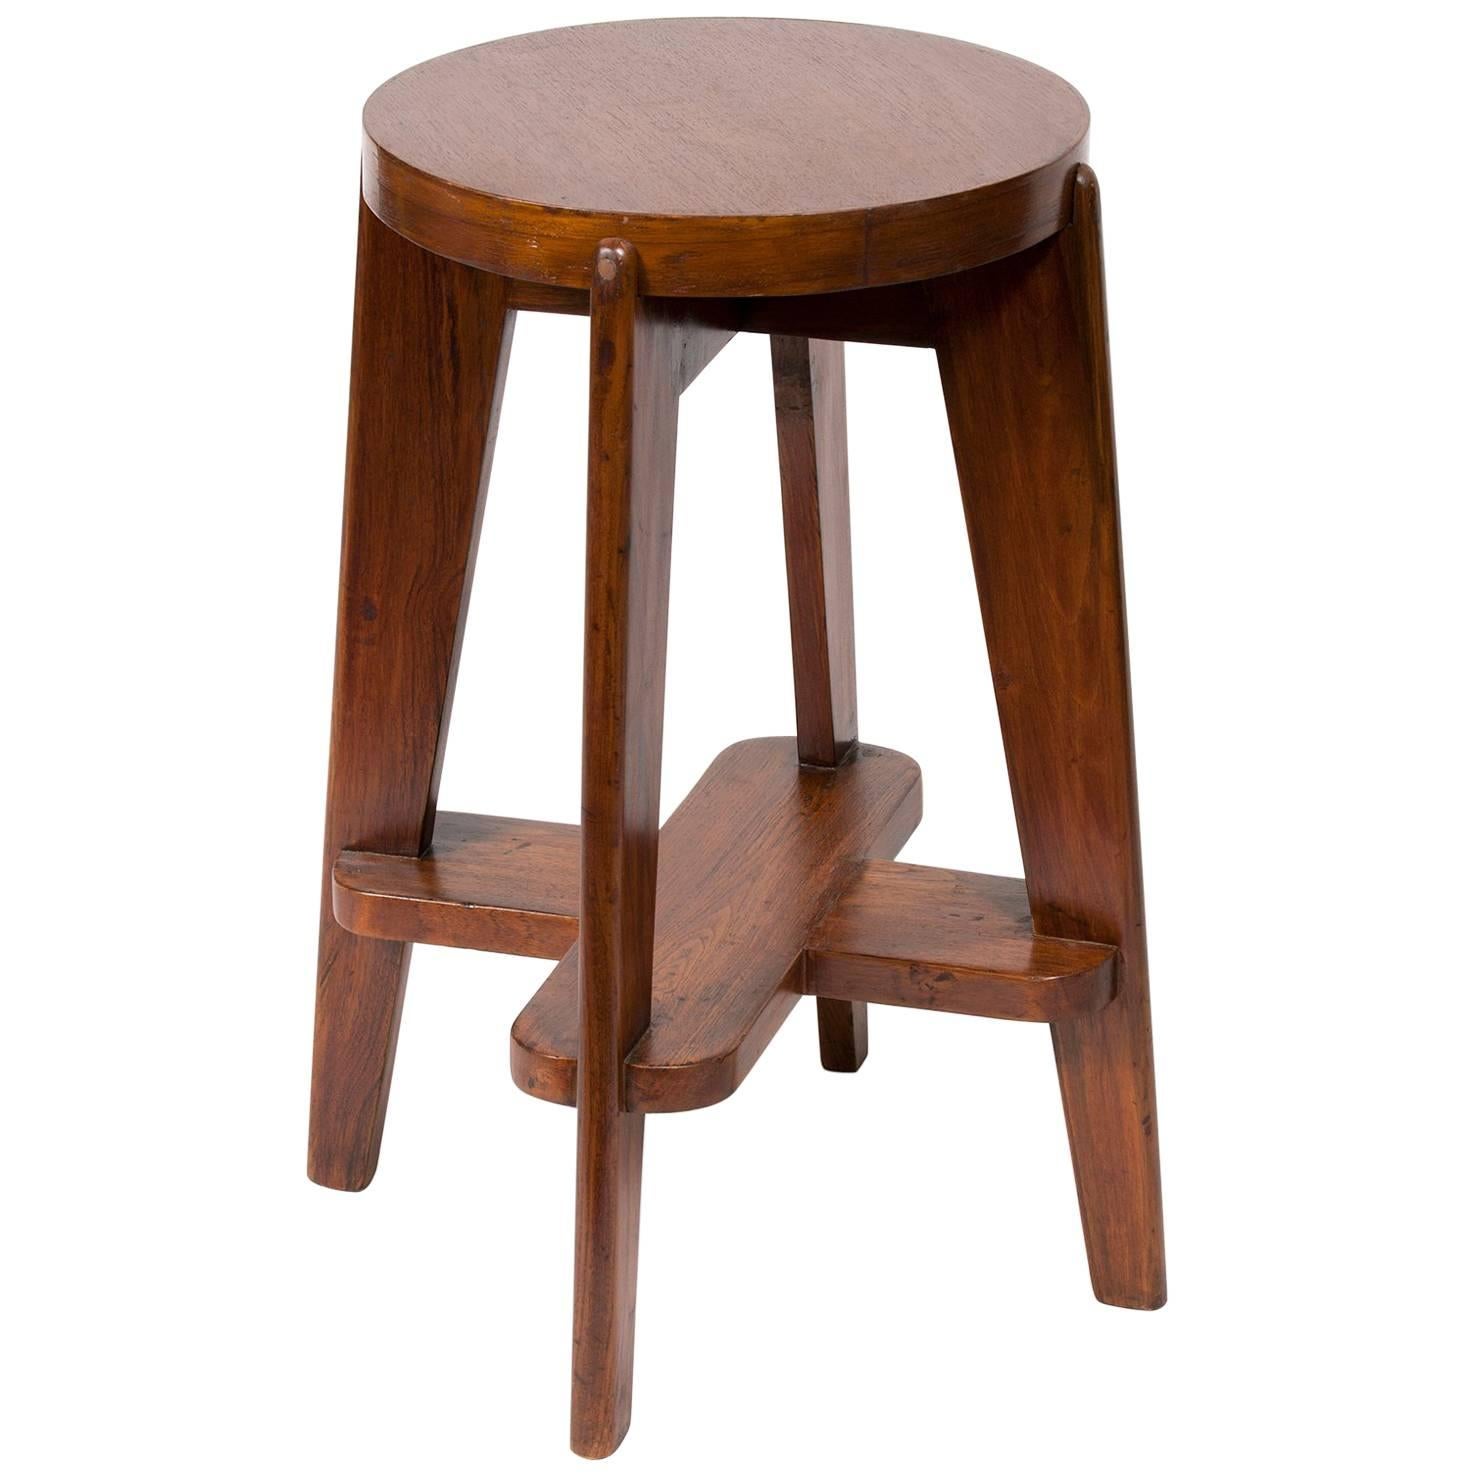 Teak High Stool by Pierre Jeanneret for the City of Chandigarh